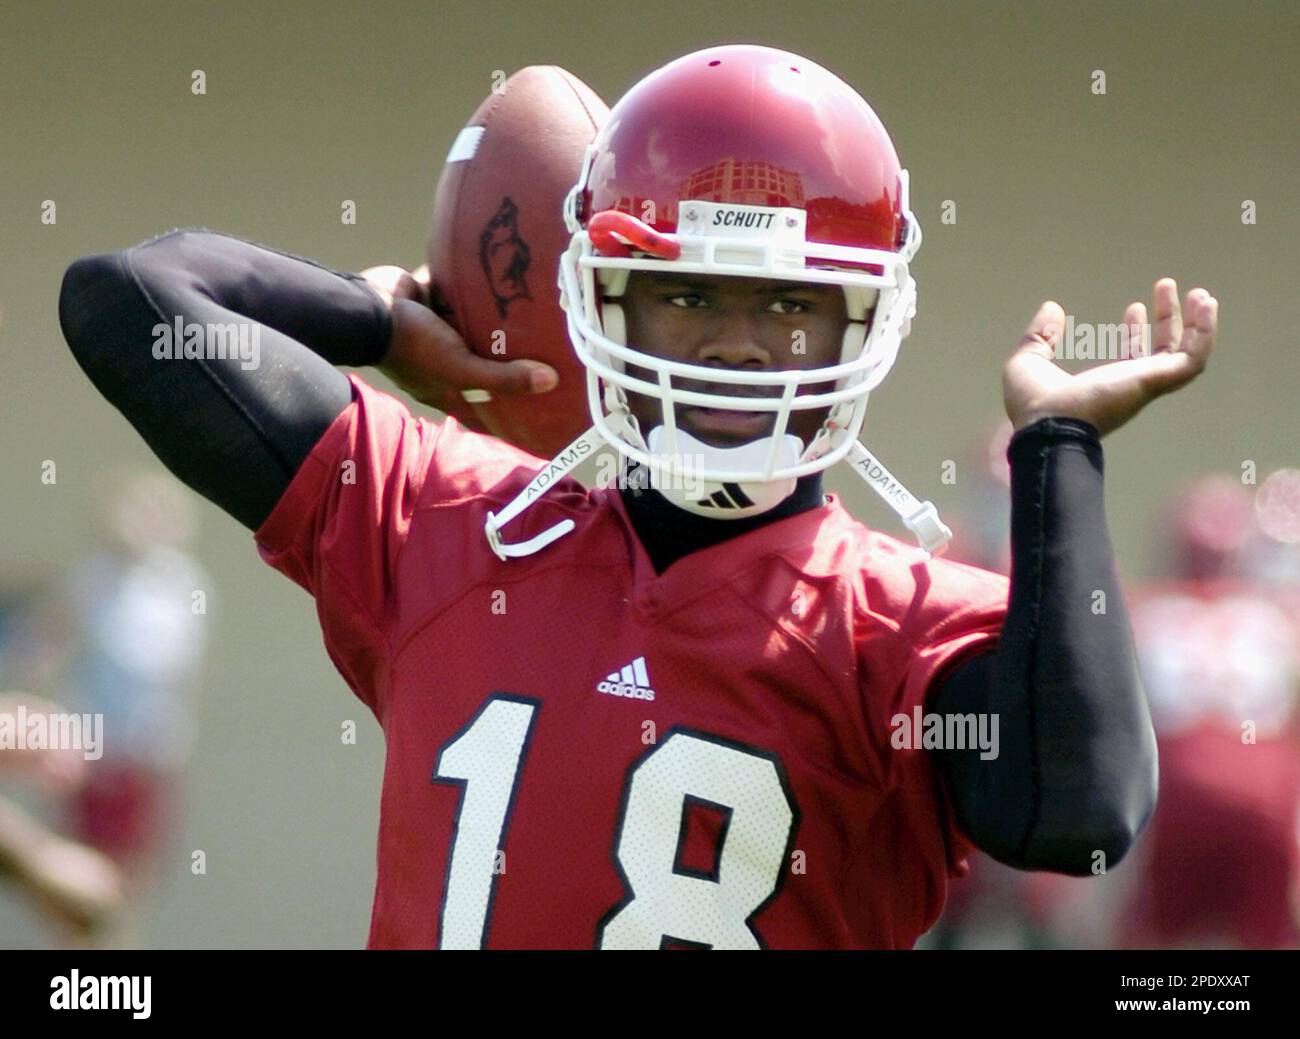 Arkansas quarterback Robert Johnson makes a pass during warm-ups before  practice in Fayetteville, Ark., Monday, Aug. 8, 2005. Johnson is expected  to take the starting quarterback job to replace matriculated Matt Jones,